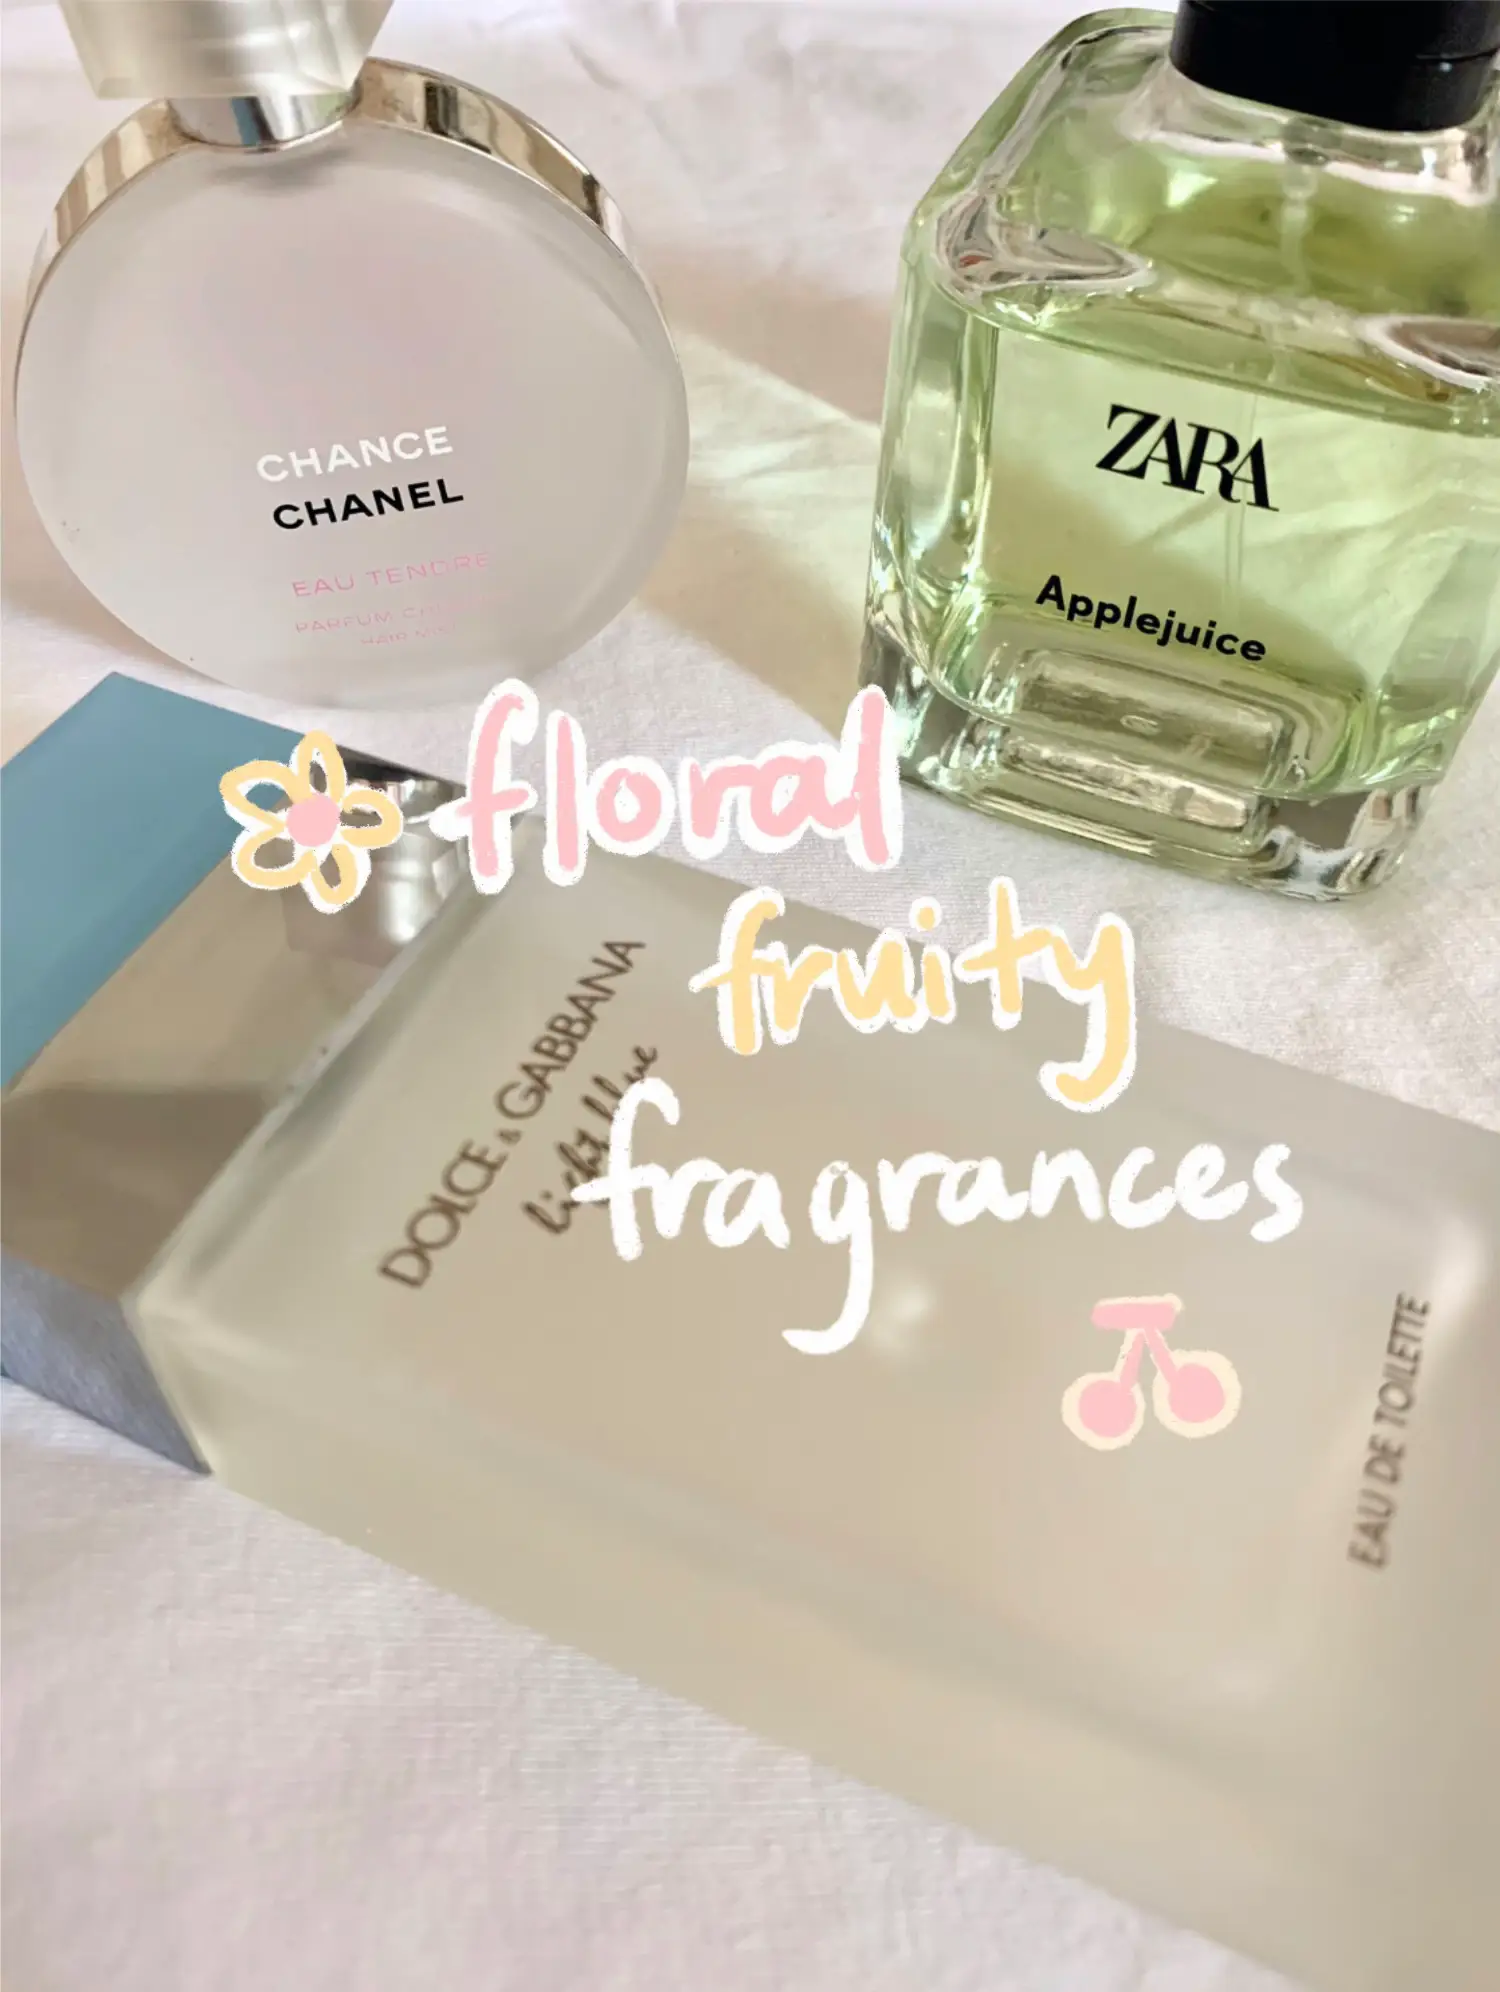 perfumes that smell like fresh fruits & flowers🌷🍋🍎, Gallery posted by  chloe